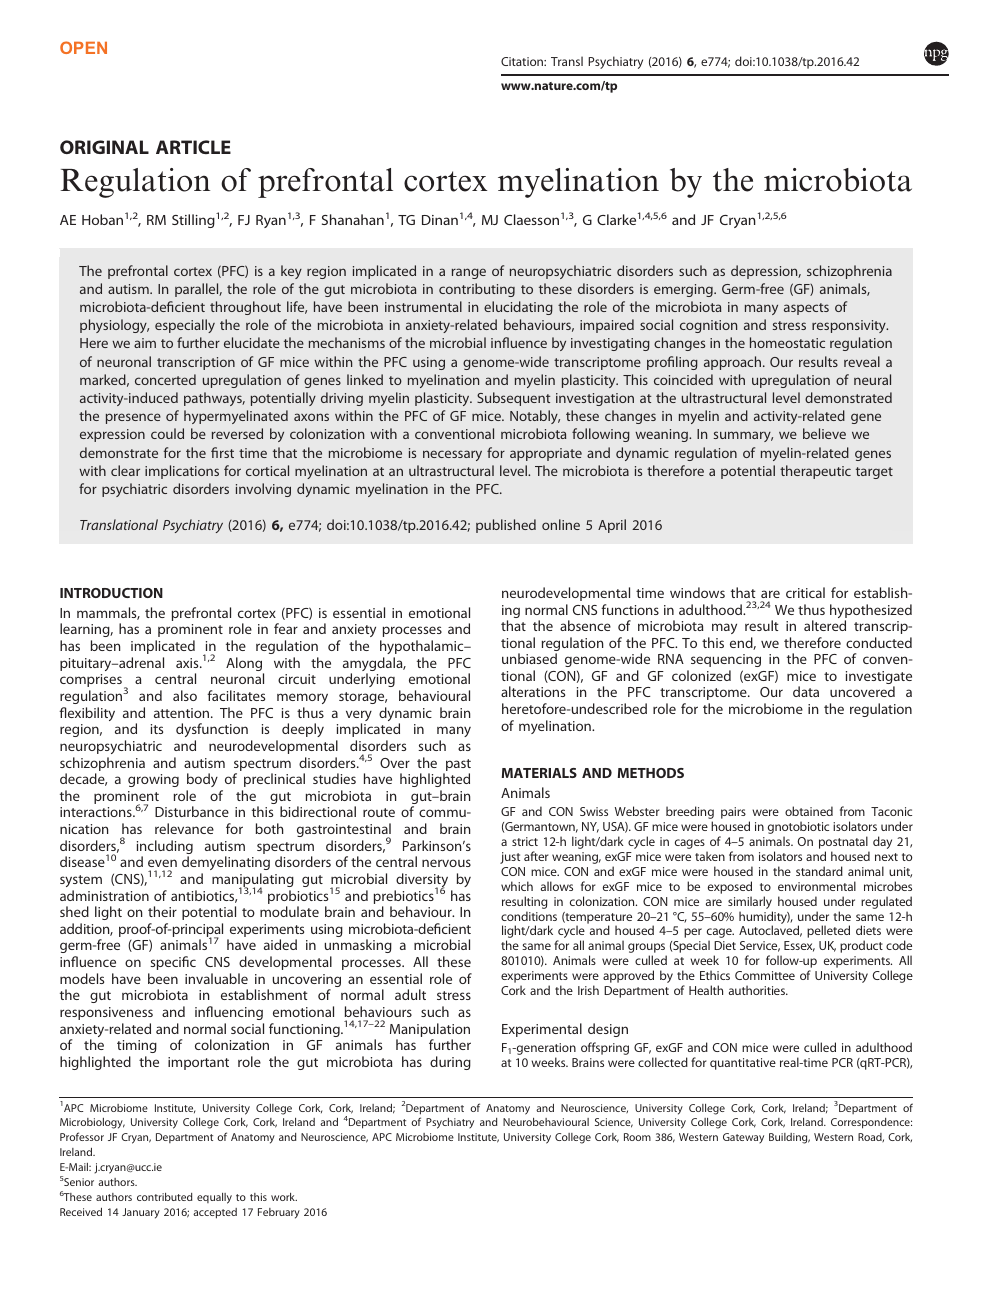 Regulation Of Prefrontal Cortex Myelination By The Microbiota Topic Of Research Paper In Biological Sciences Download Scholarly Article Pdf And Read For Free On Cyberleninka Open Science Hub